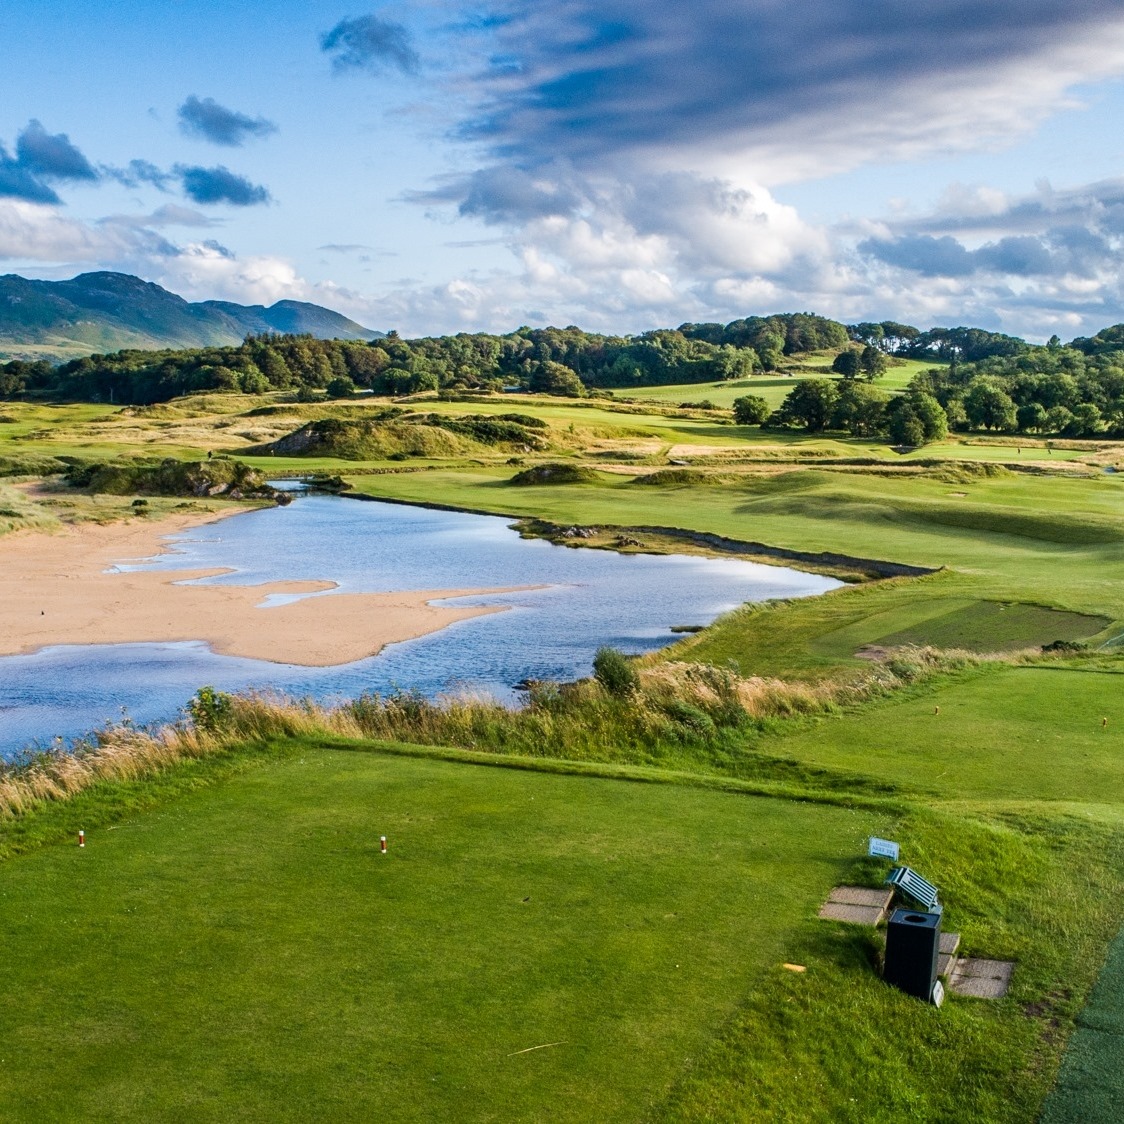 Portsalon Golf Club 18 holes between sea and mountains in Ireland